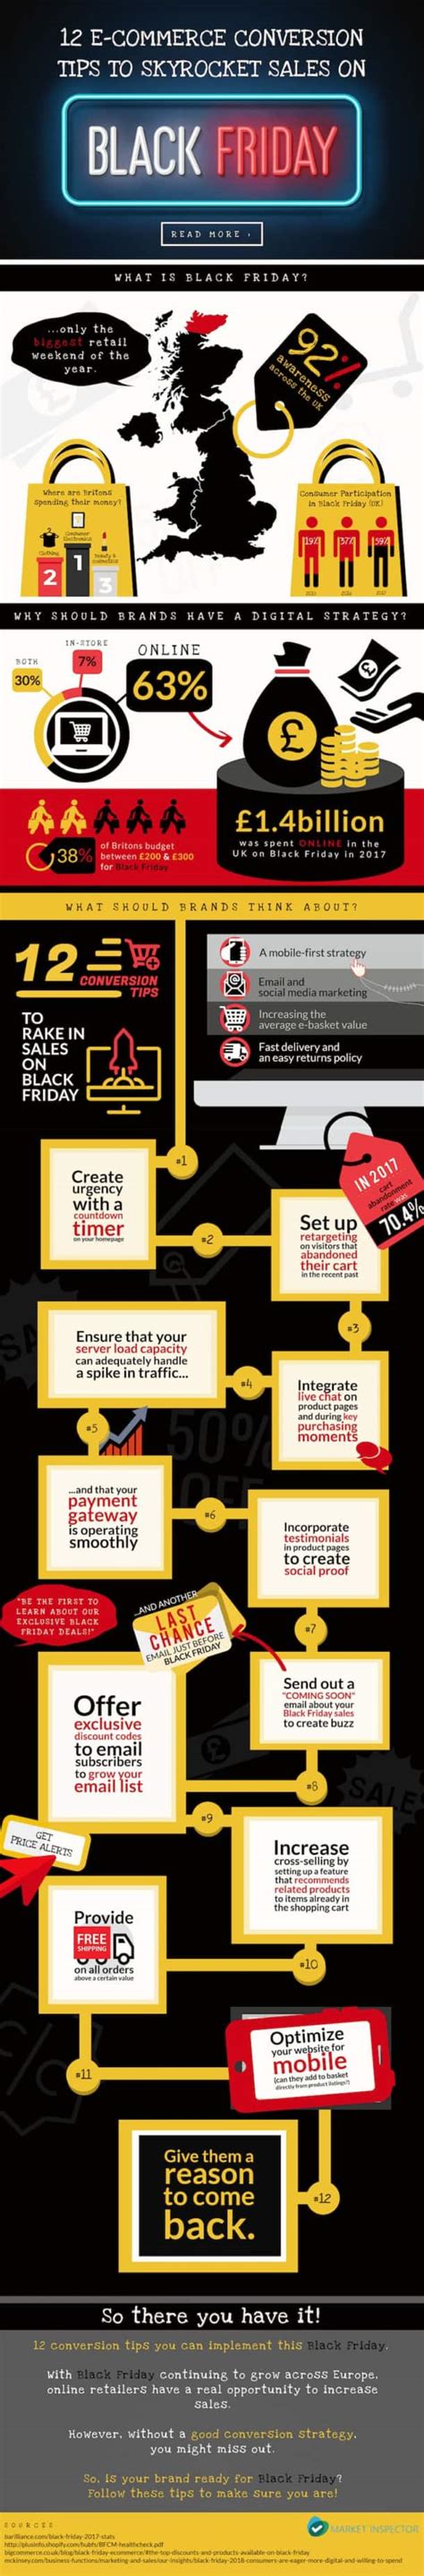 minute ecommerce tips  black friday cyber monday infographic